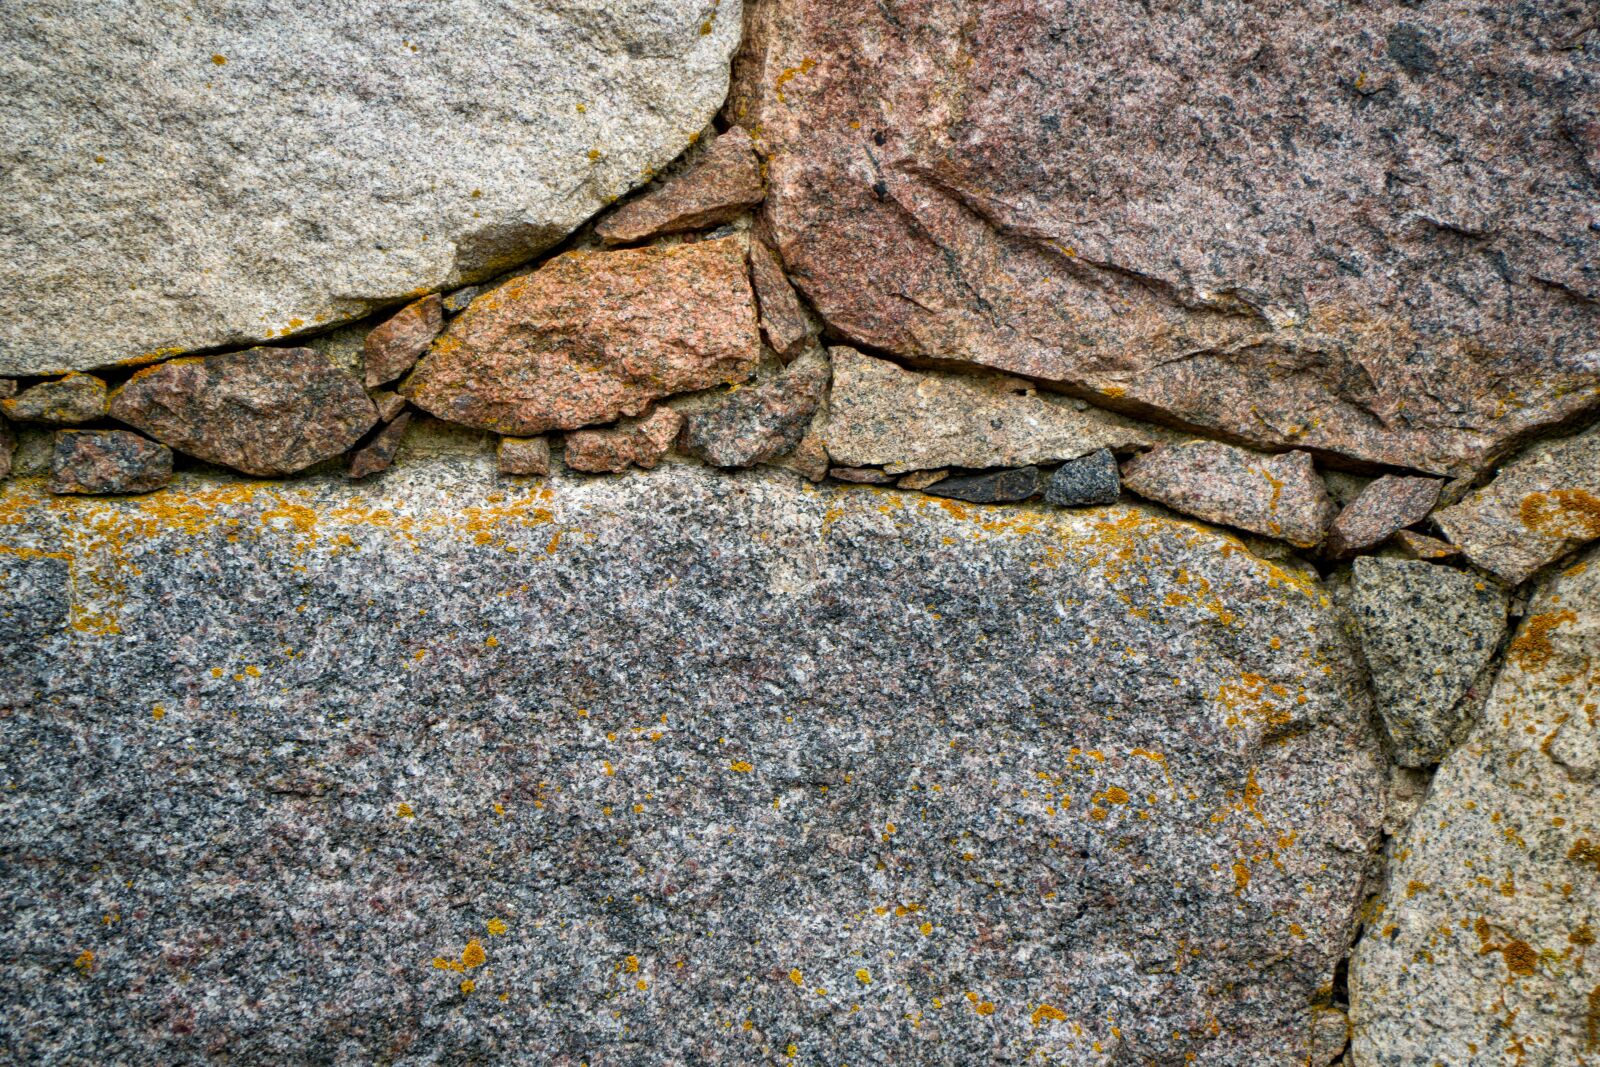 Sony E PZ 18-105mm F4 G OSS sample photo. Field stones, natural stones photography